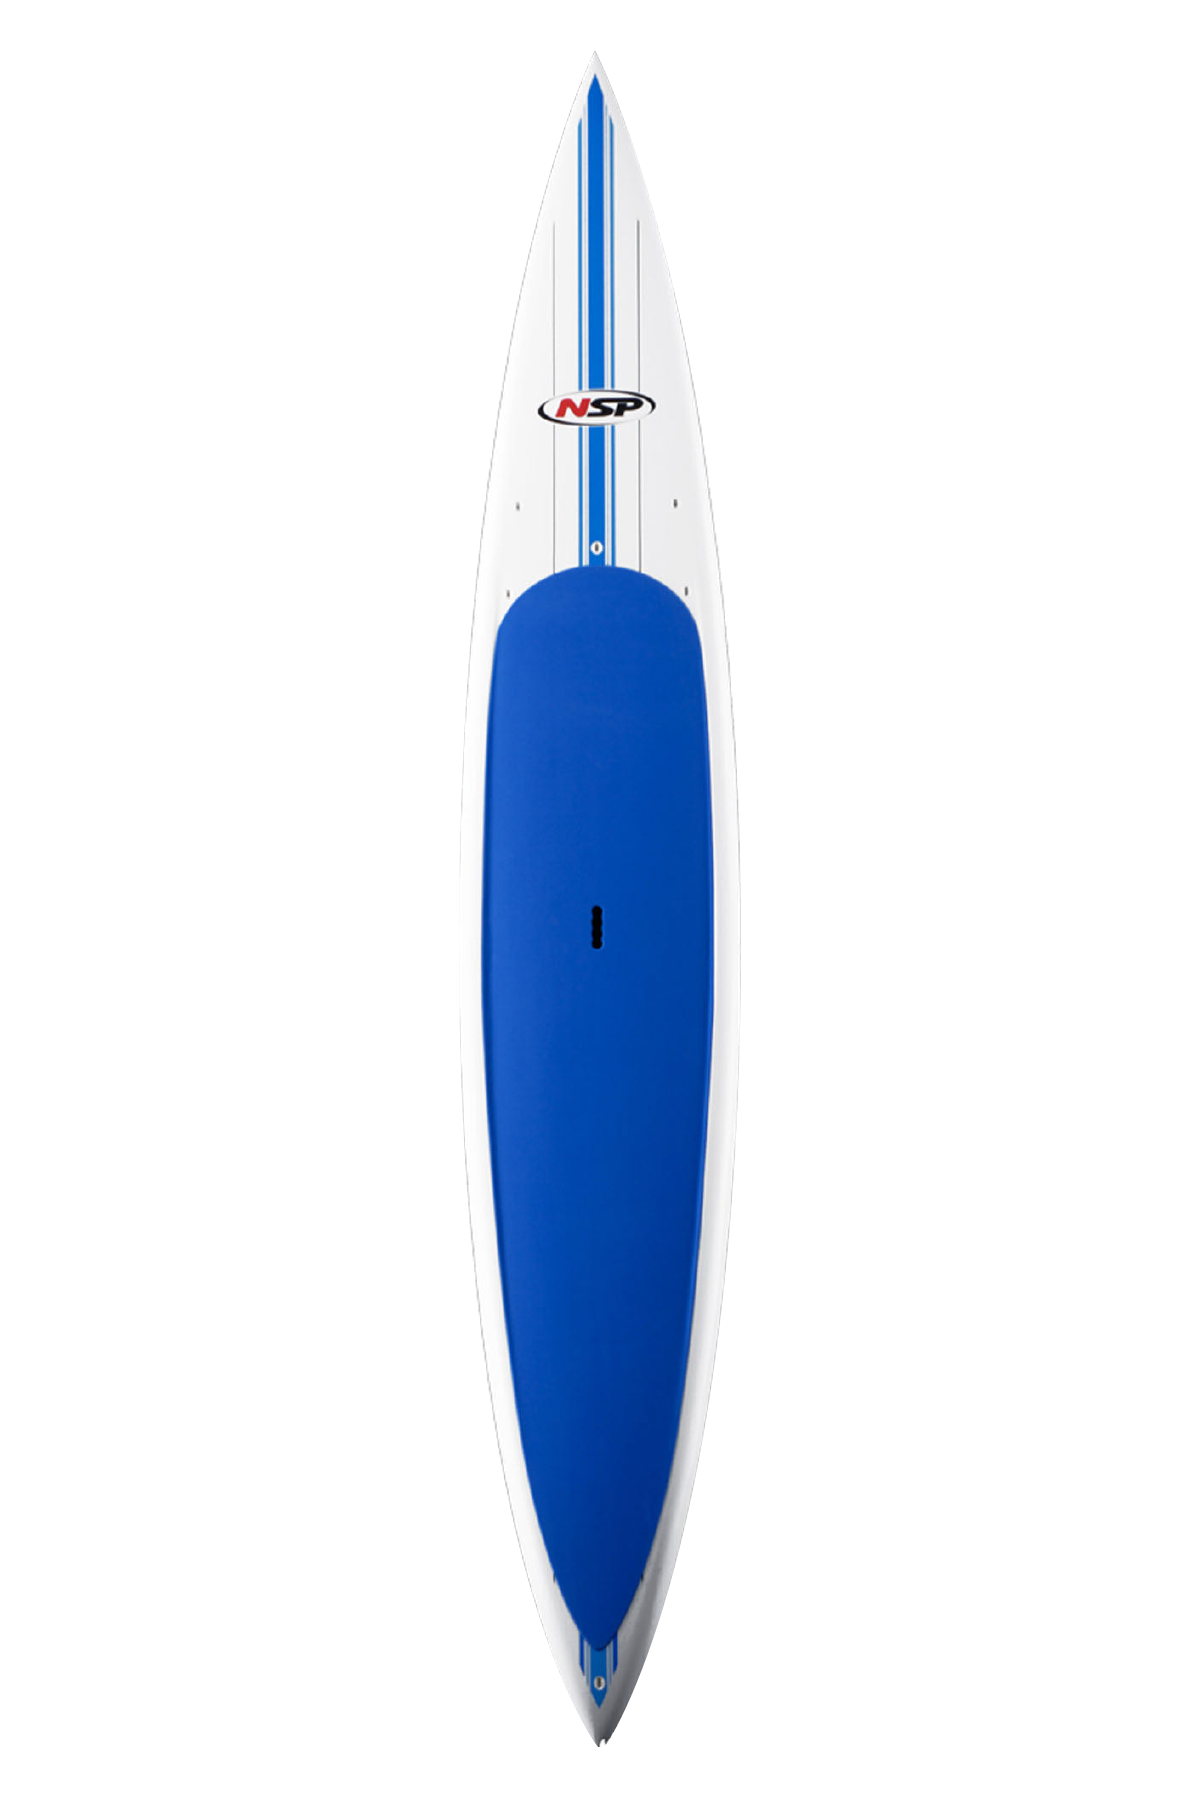 14' NSP SUP FLATWATER RACE